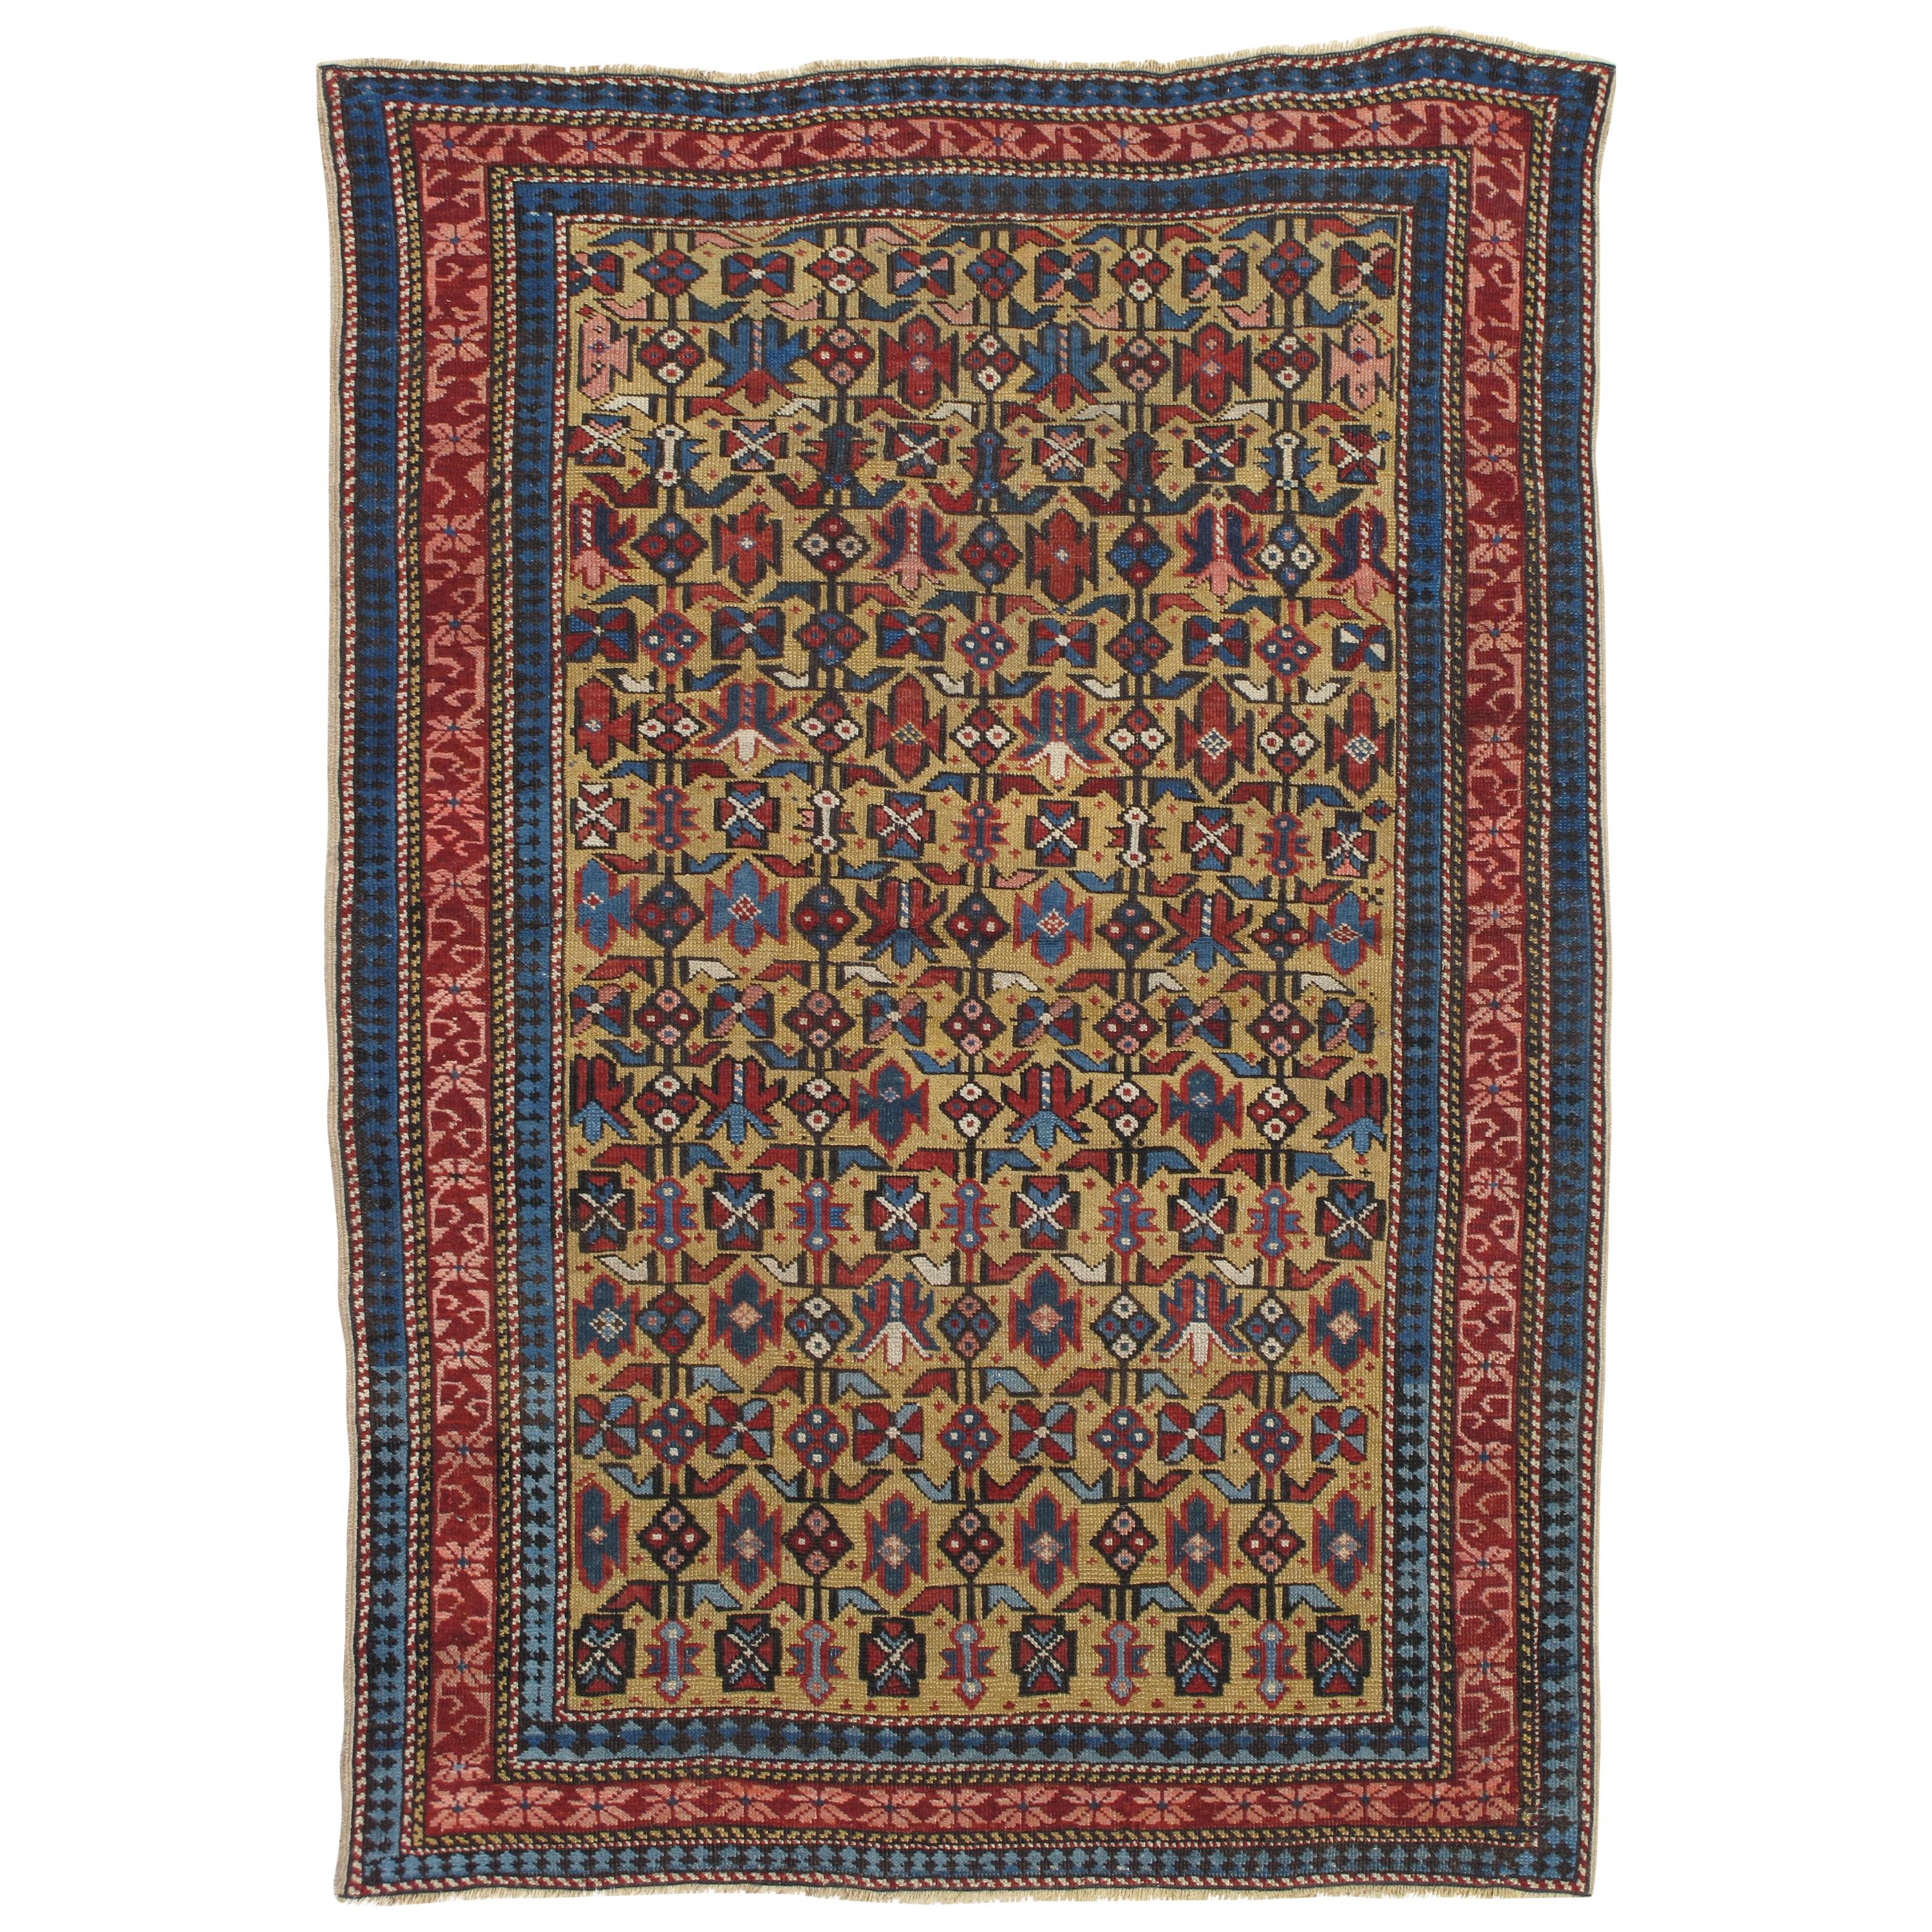 Antique Shirvan Rug, circa 1880 Hand Knotted, Wool Oriental Rug